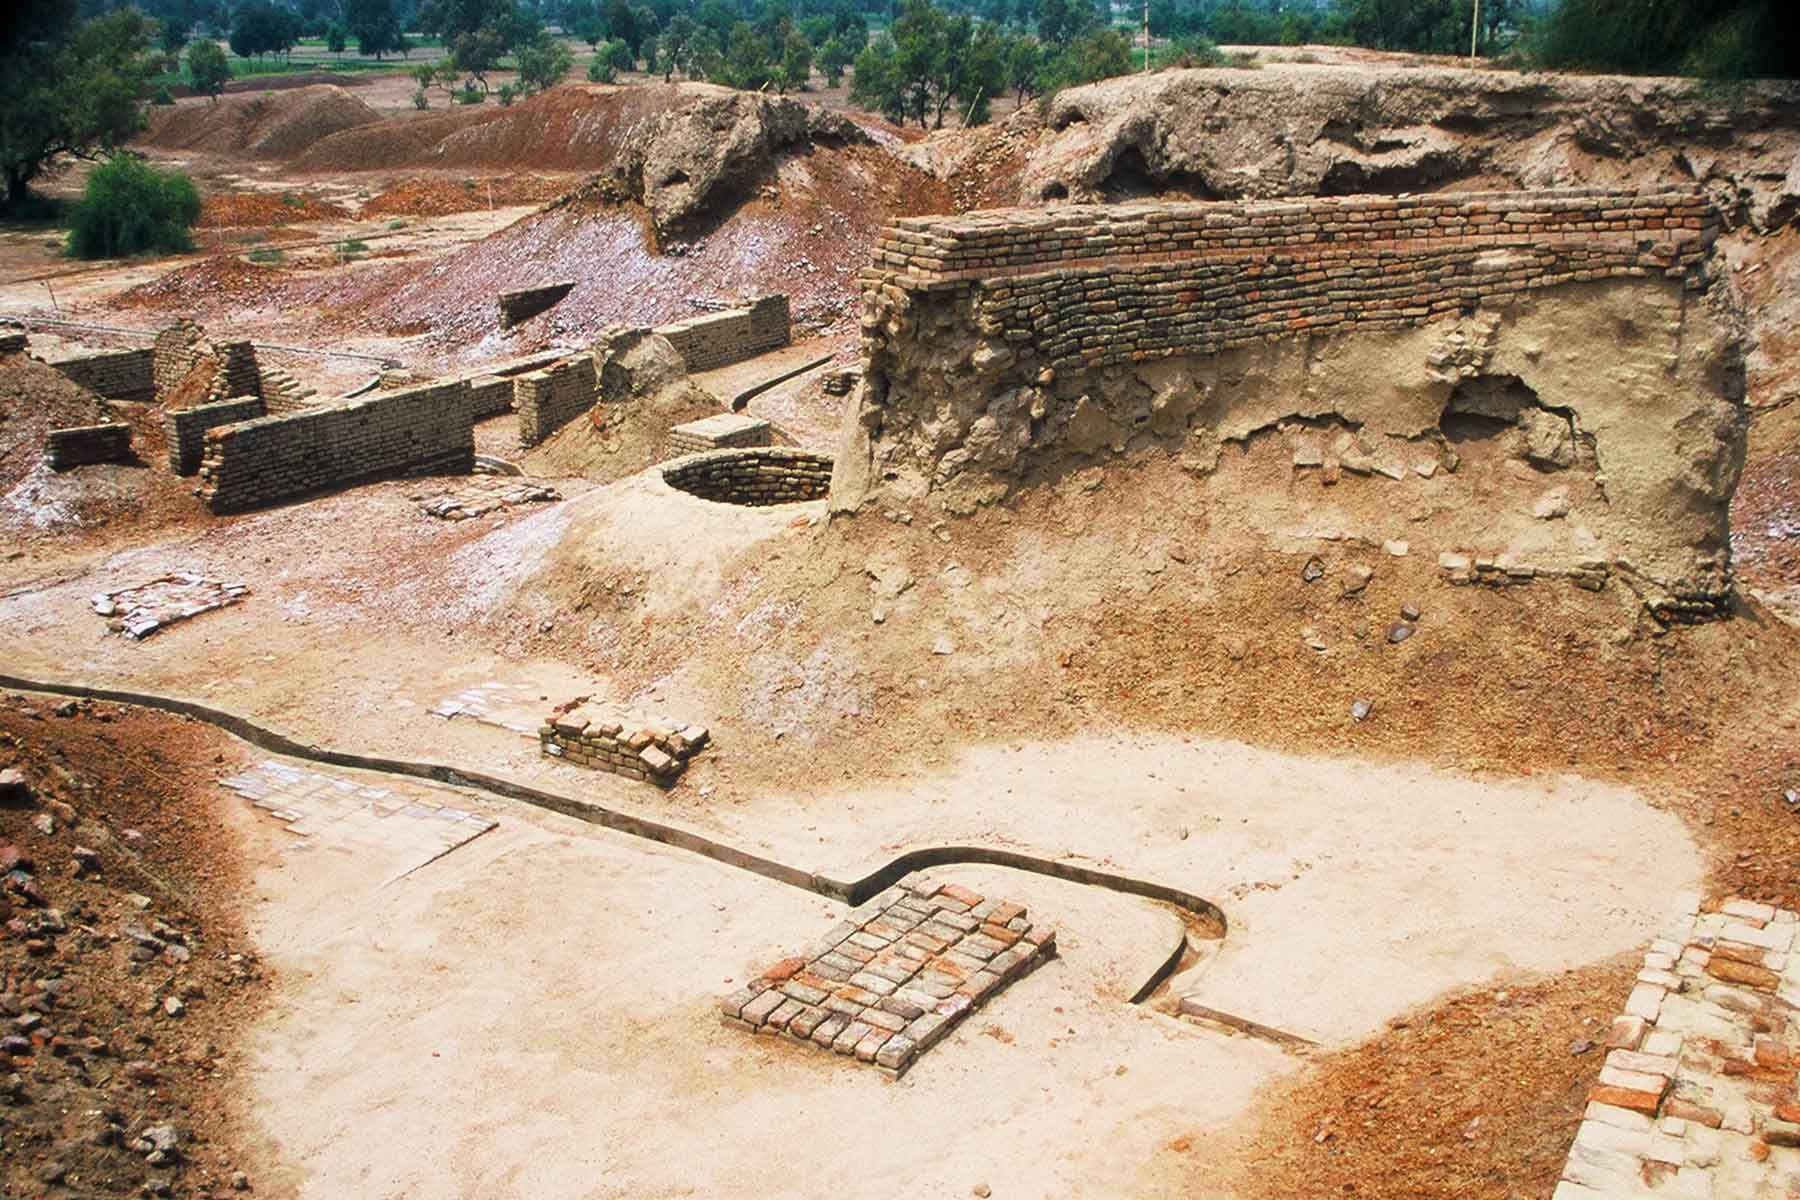 Harappa Archaeological Site - Indus River Valley Civilization - Steven Andrew Martin - Pakistan Photo Journal